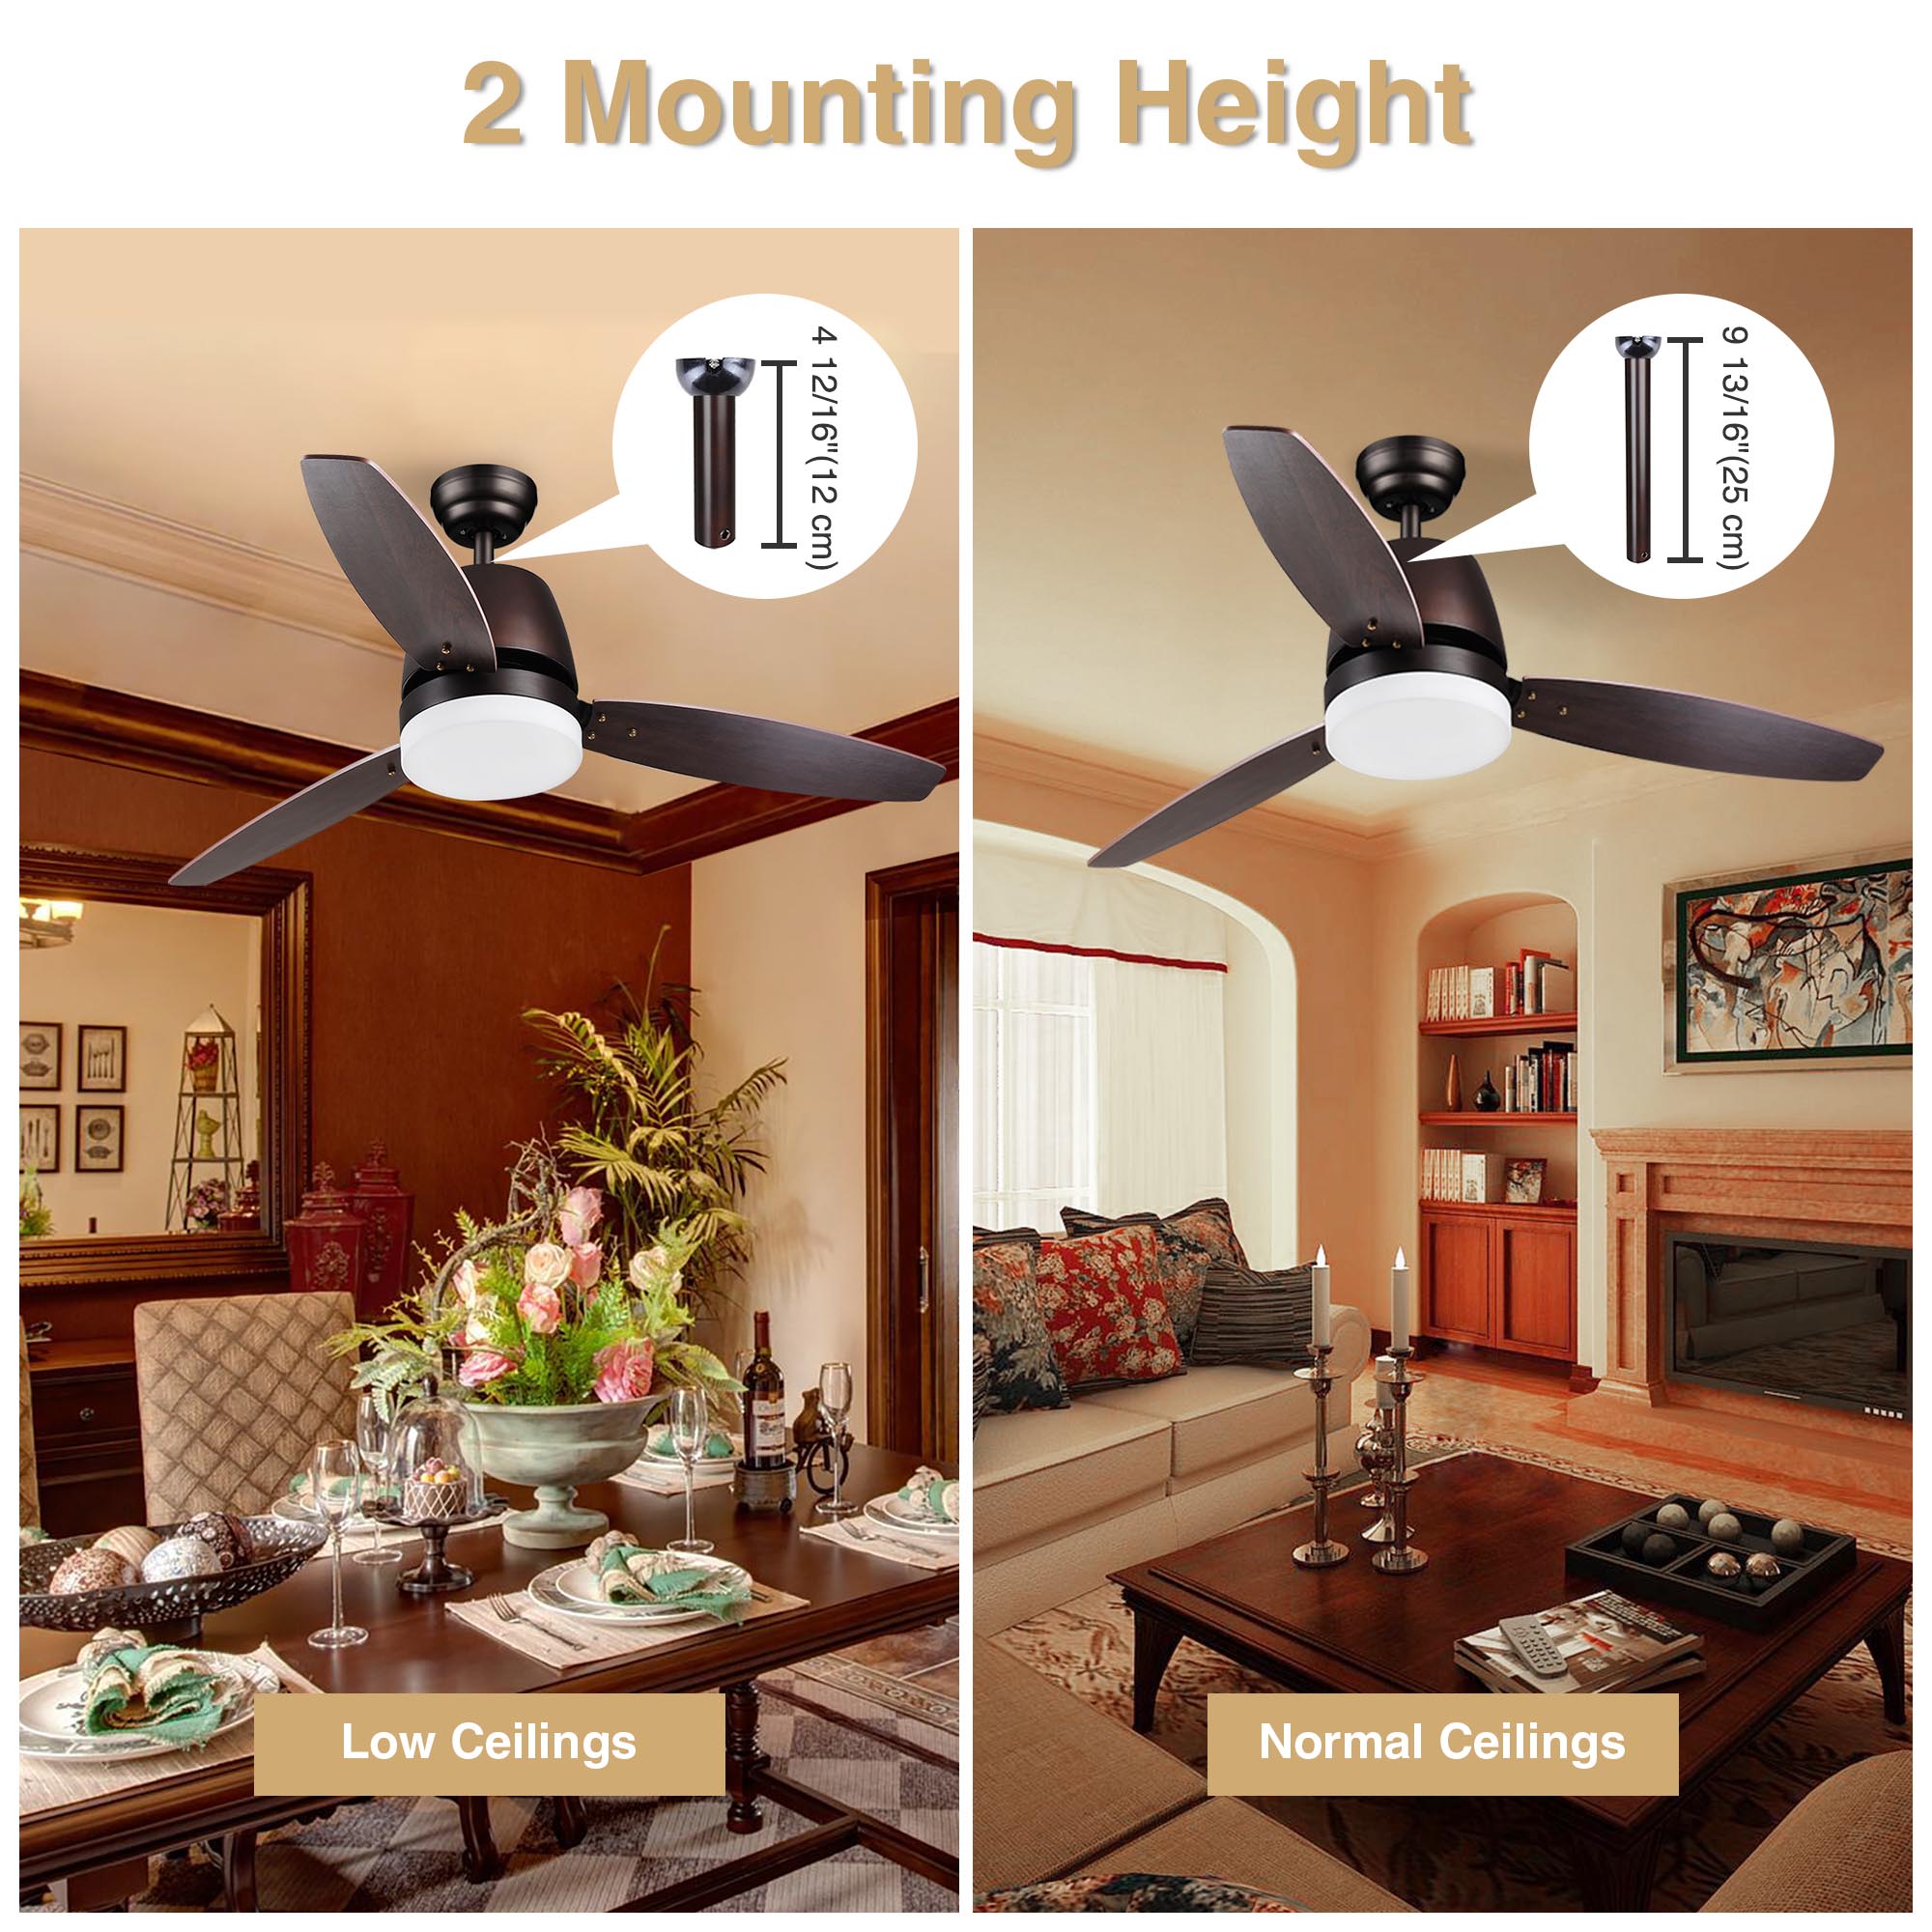 Delight 52" 3 Blades Ceiling Fan with LED Light and Remote Control Indoor Room Decoration